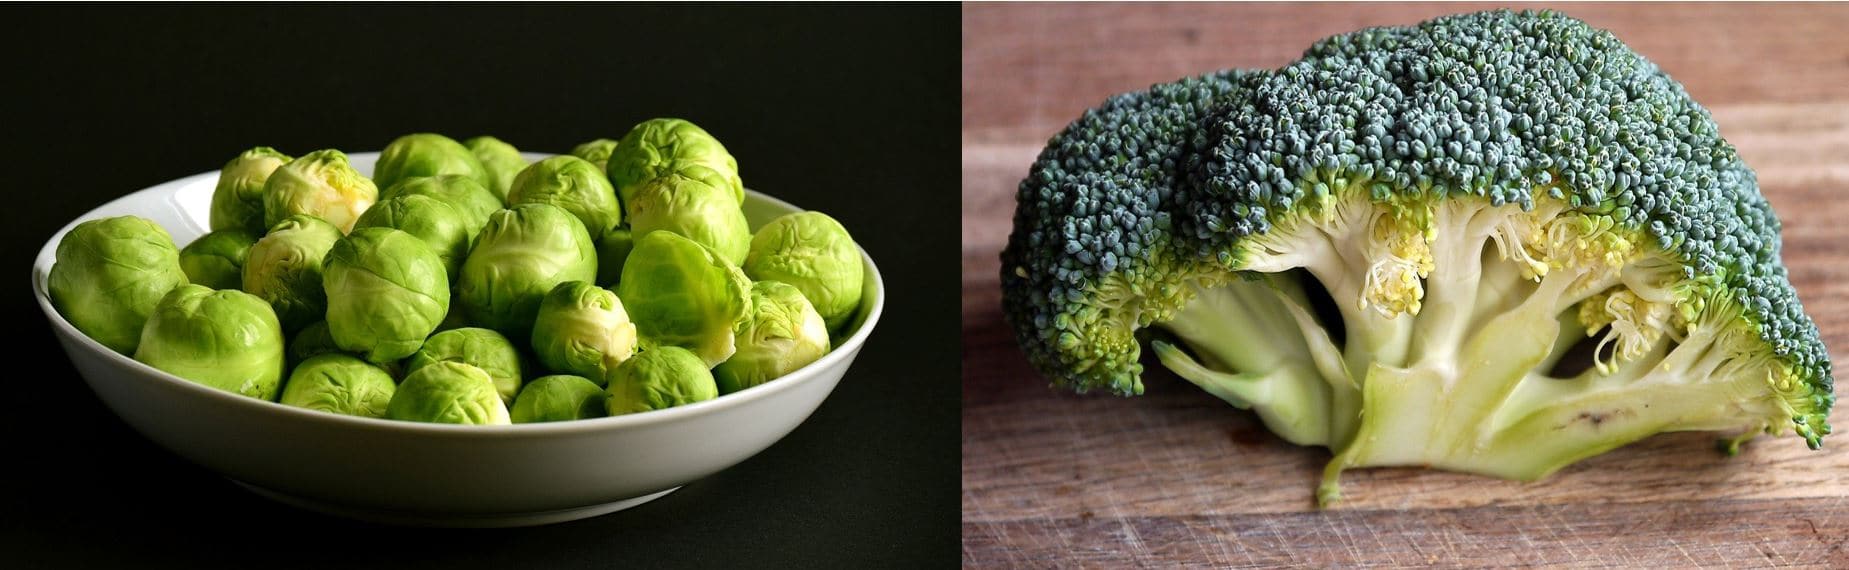 Brussel Sprouts vs Broccoli - A Well Drawn Parallelism Of The Two Essential Greens